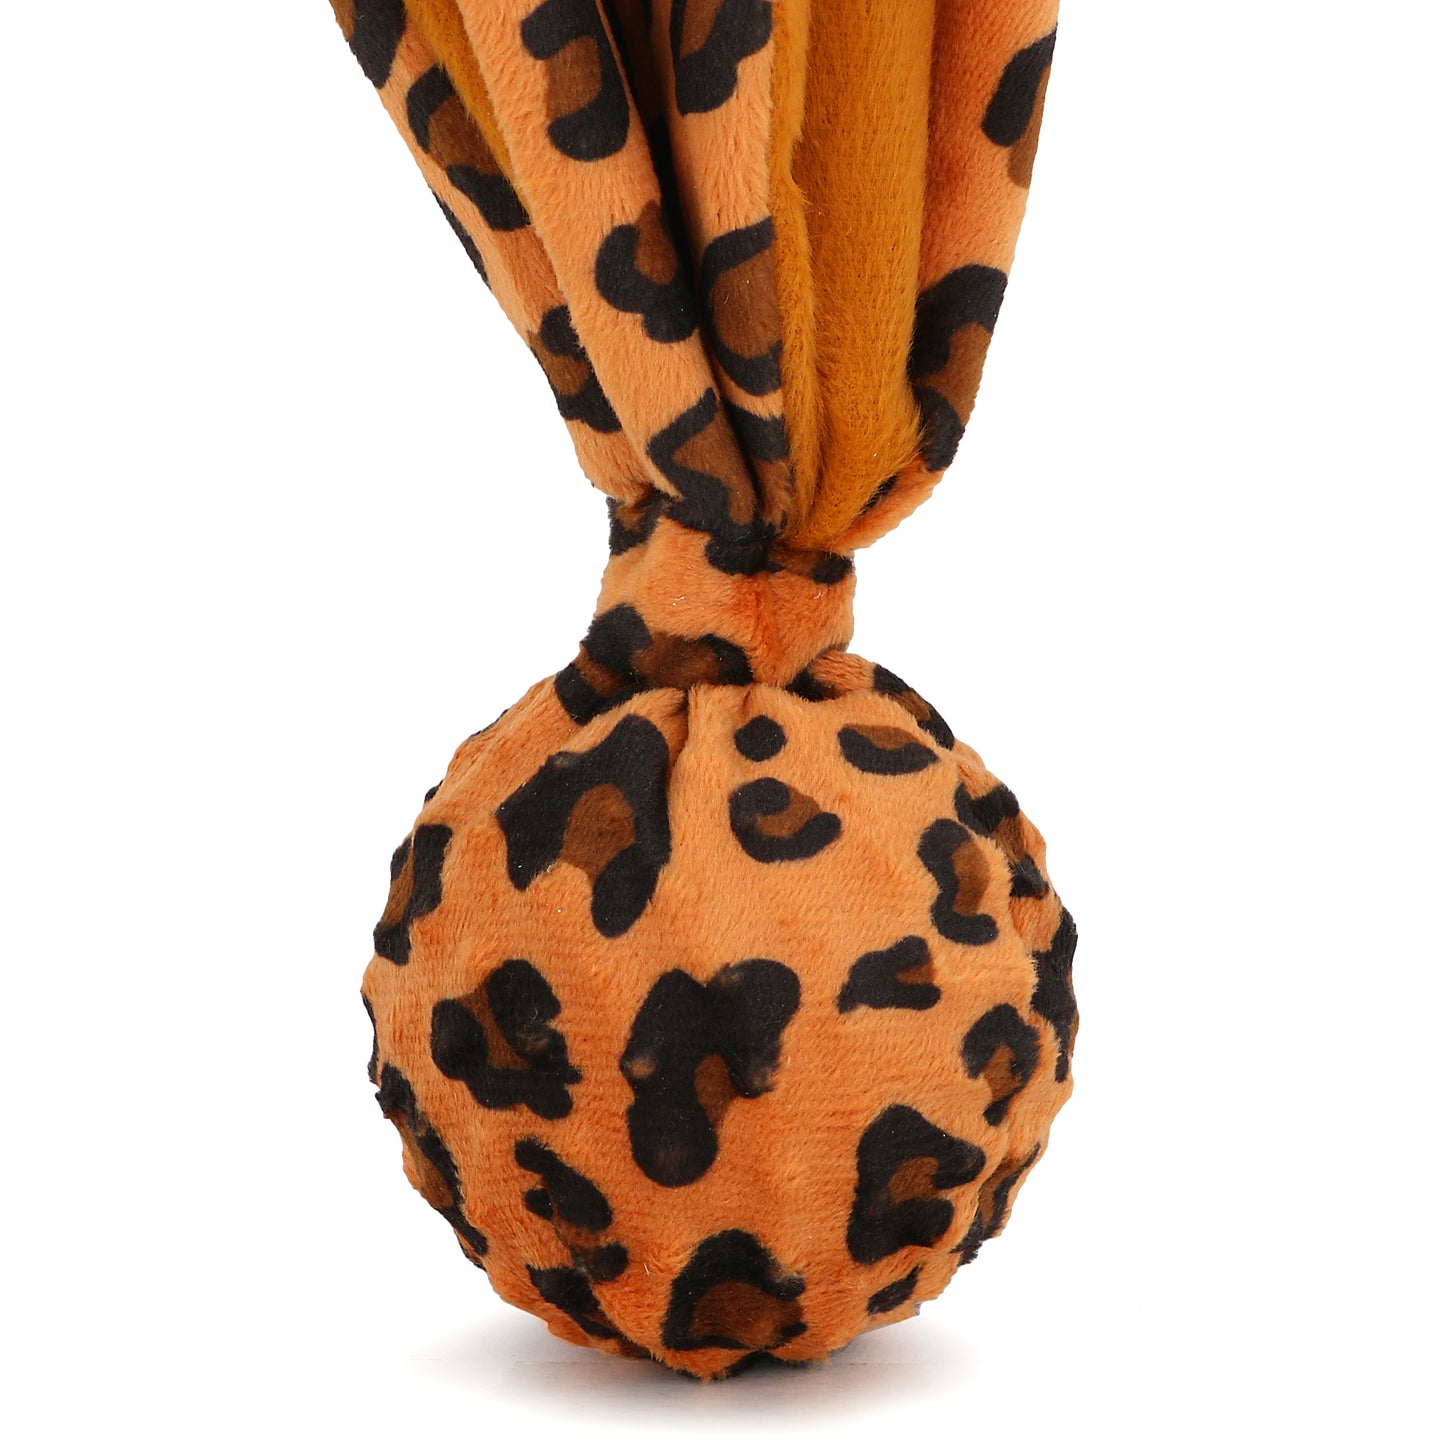 BASIL Soft Plush with Squeaky Spike Ball for Dog & Puppy